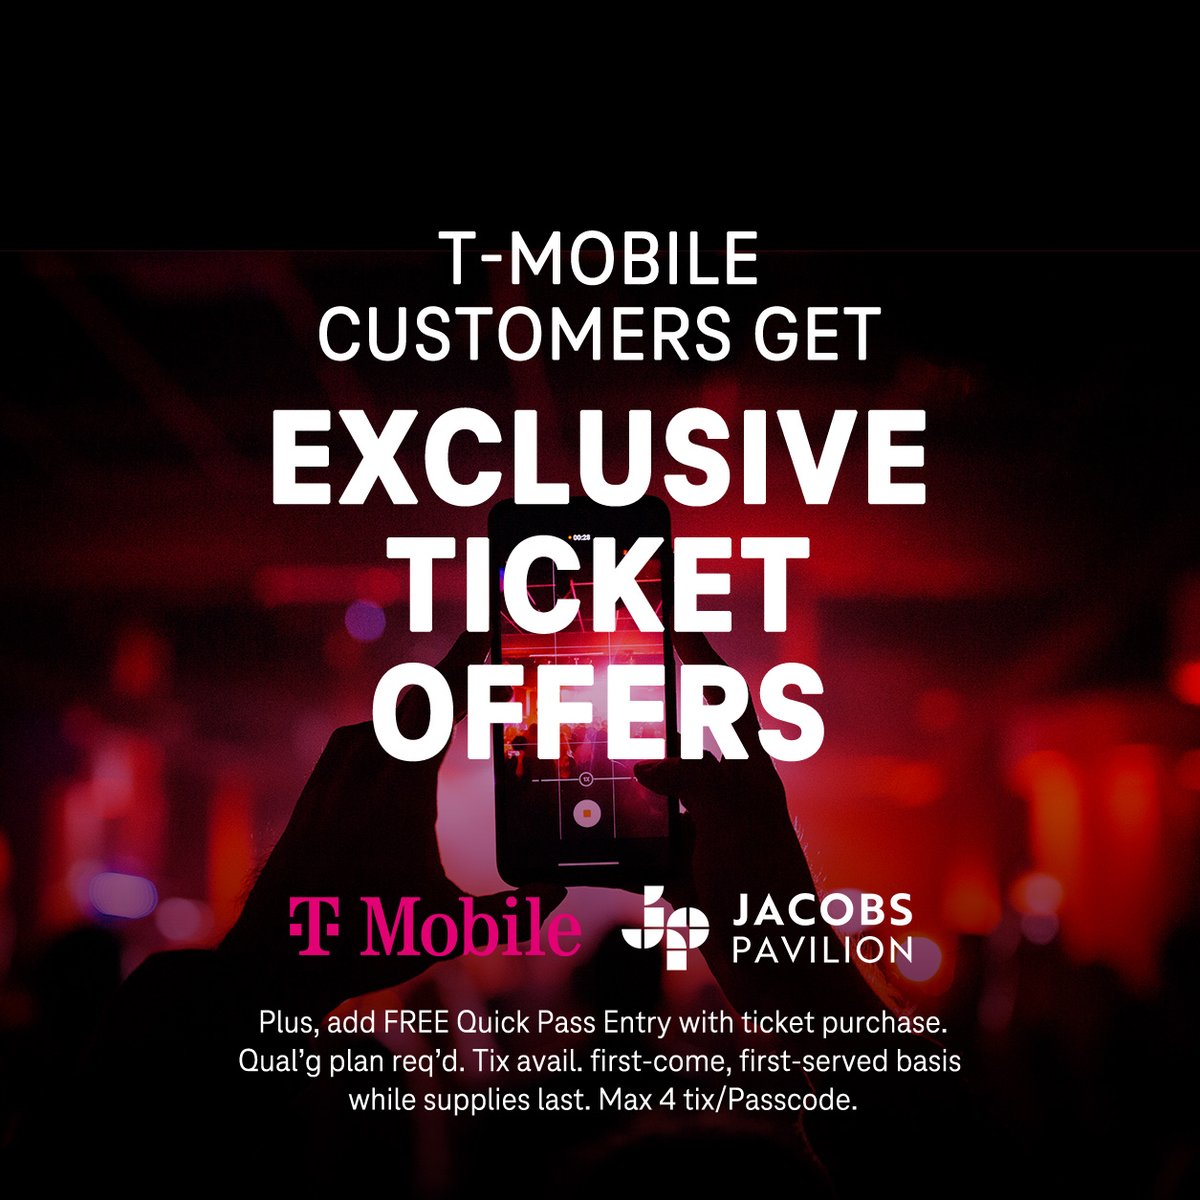 Skip with joy while skipping the line. @tmobile customers get exclusive ticket offers and Quick Pass for FREE 🤑 🔗: buff.ly/40Y20Ni